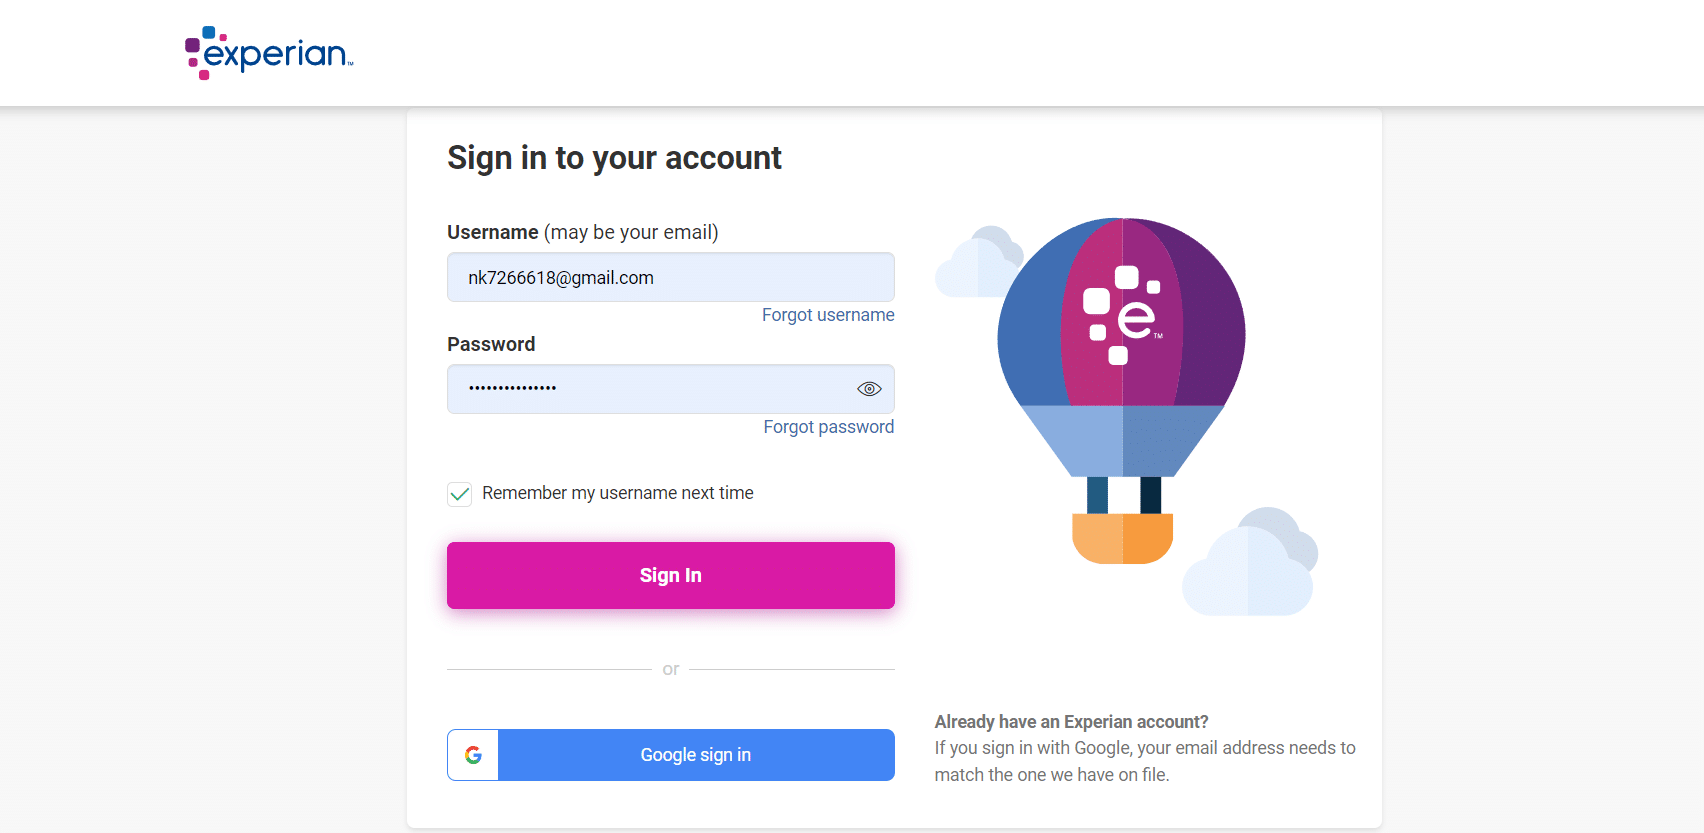 Sign in by entering your email address and password | 